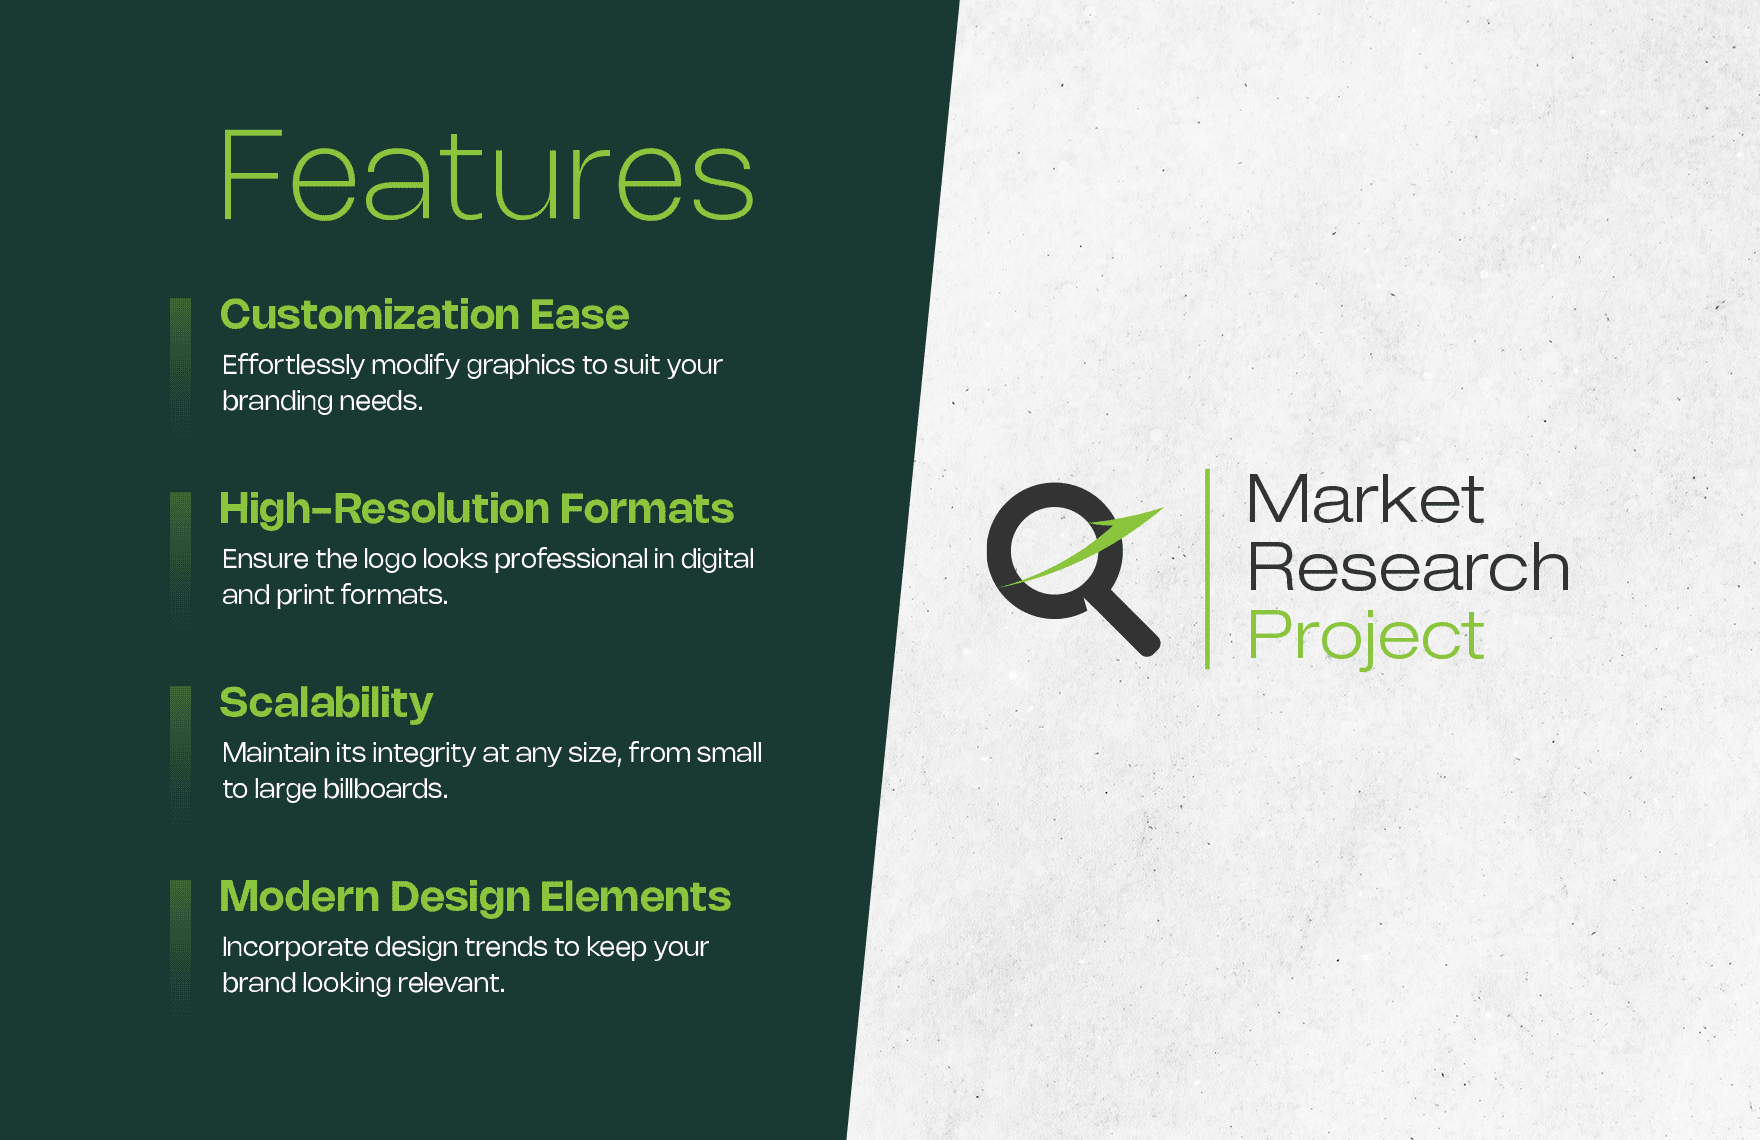 Market Research Project Logo Template